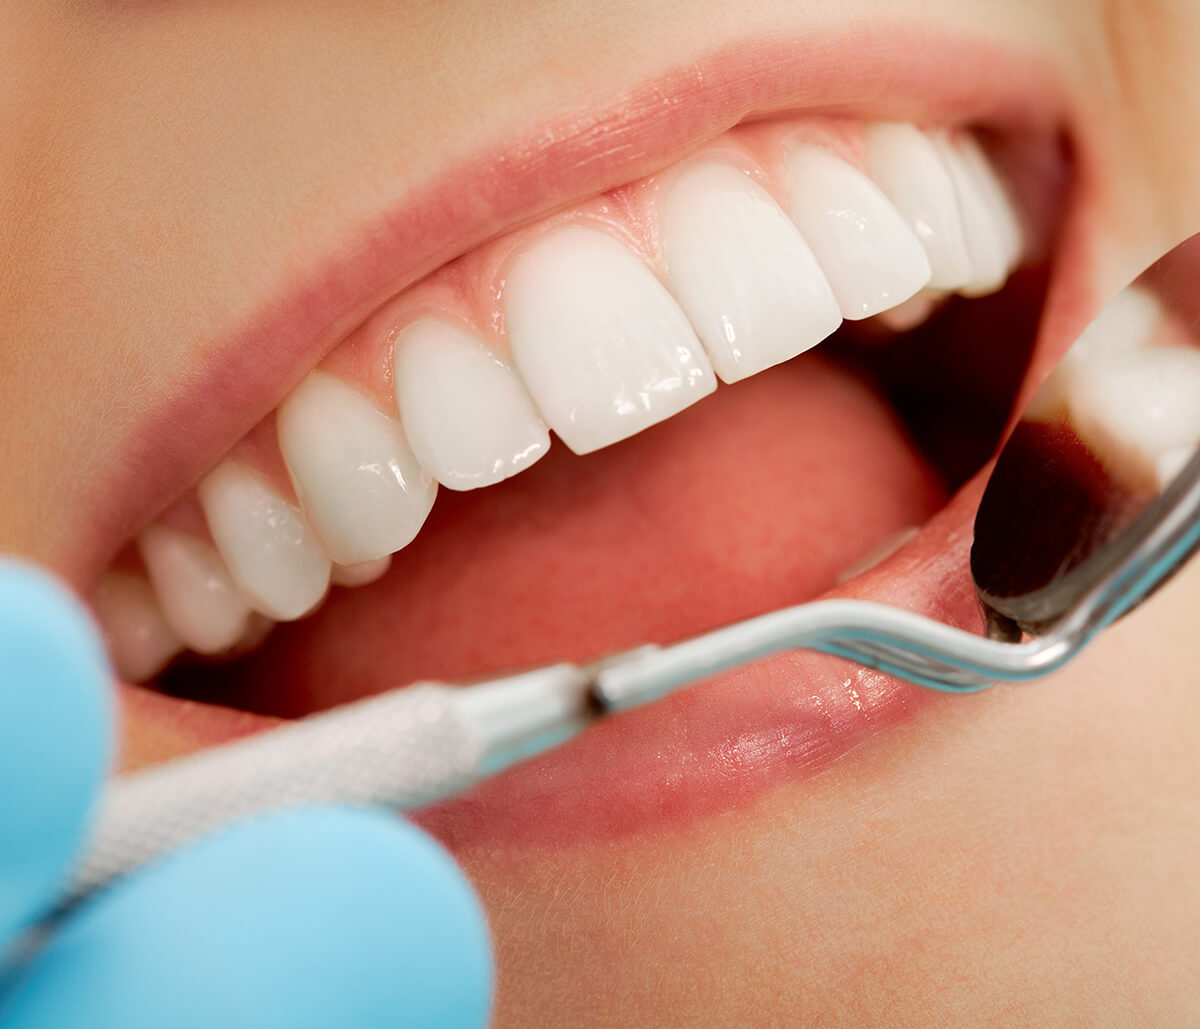 Regain Your Smile with Dental Care Treatments in Calgary AB Area